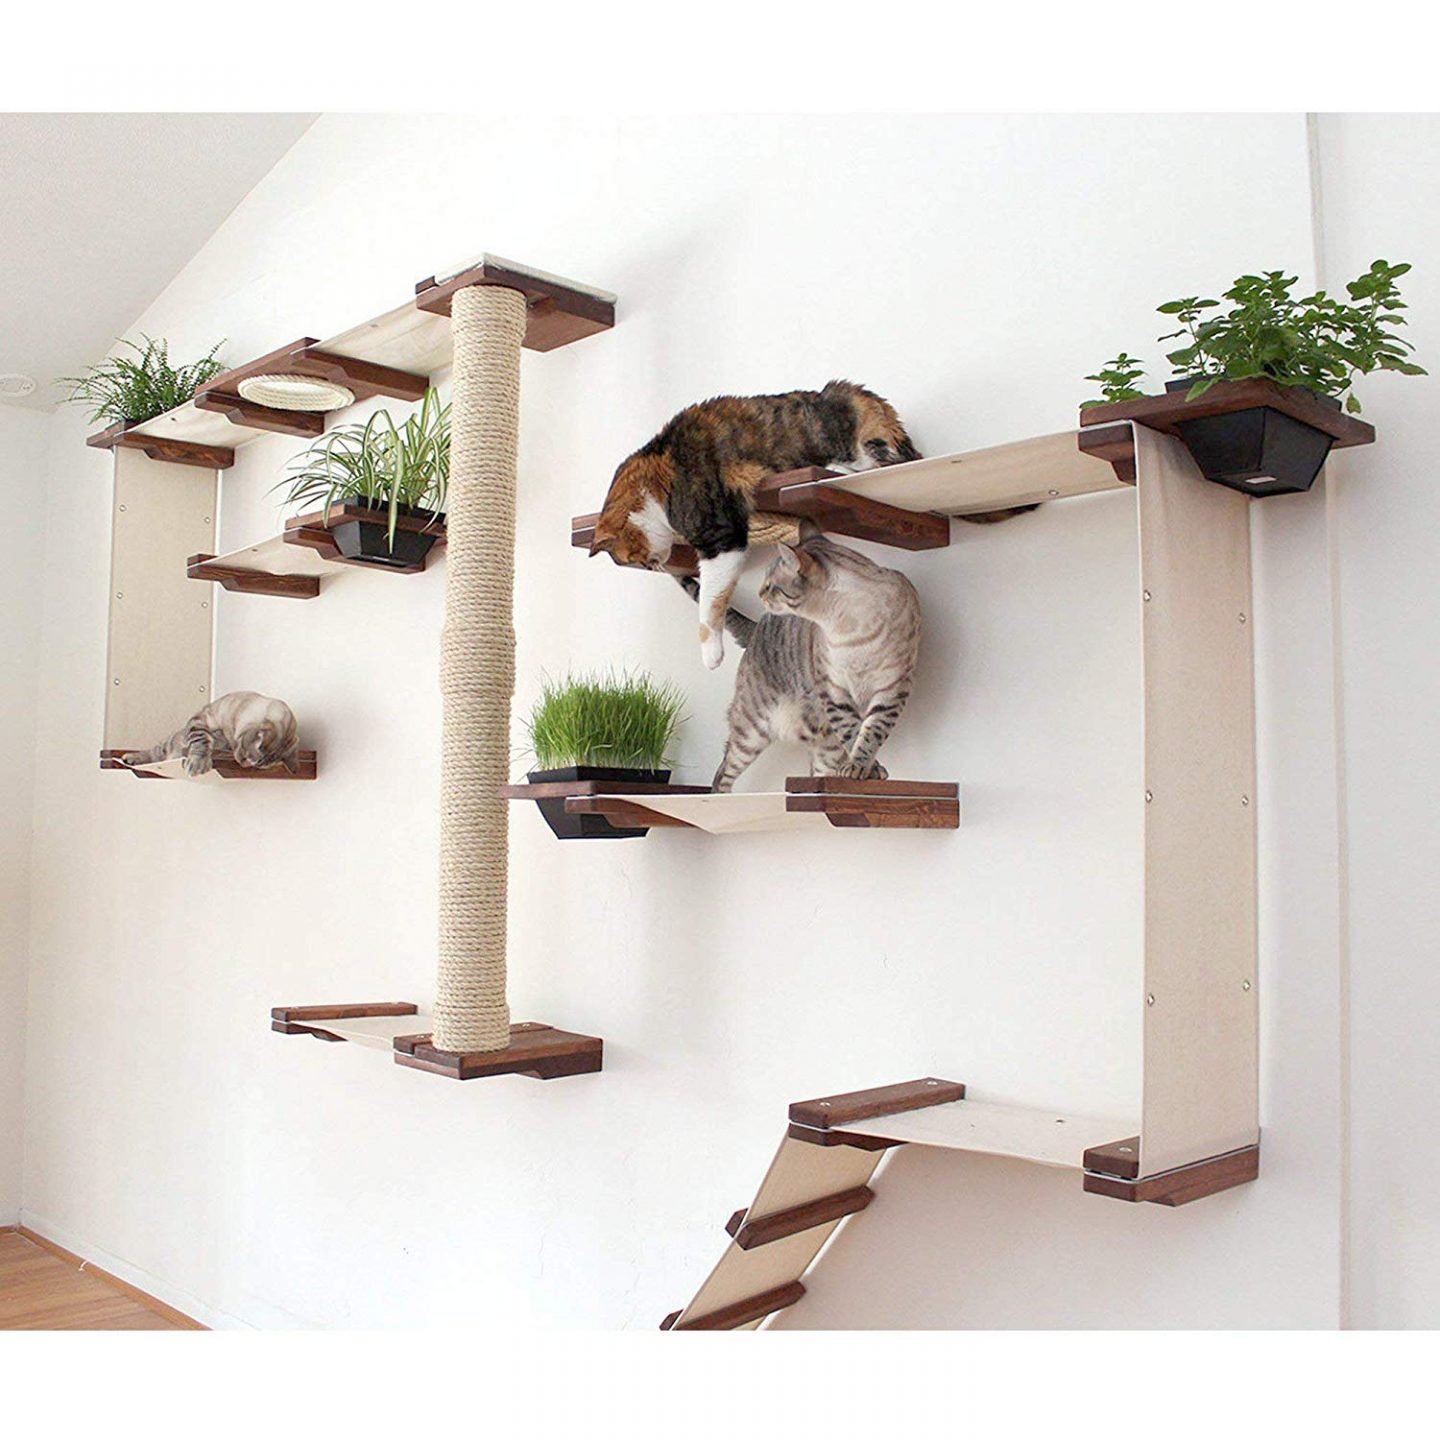 A full sized cat shelf kit, it's great because it gives your cat a whole lot of romping space.